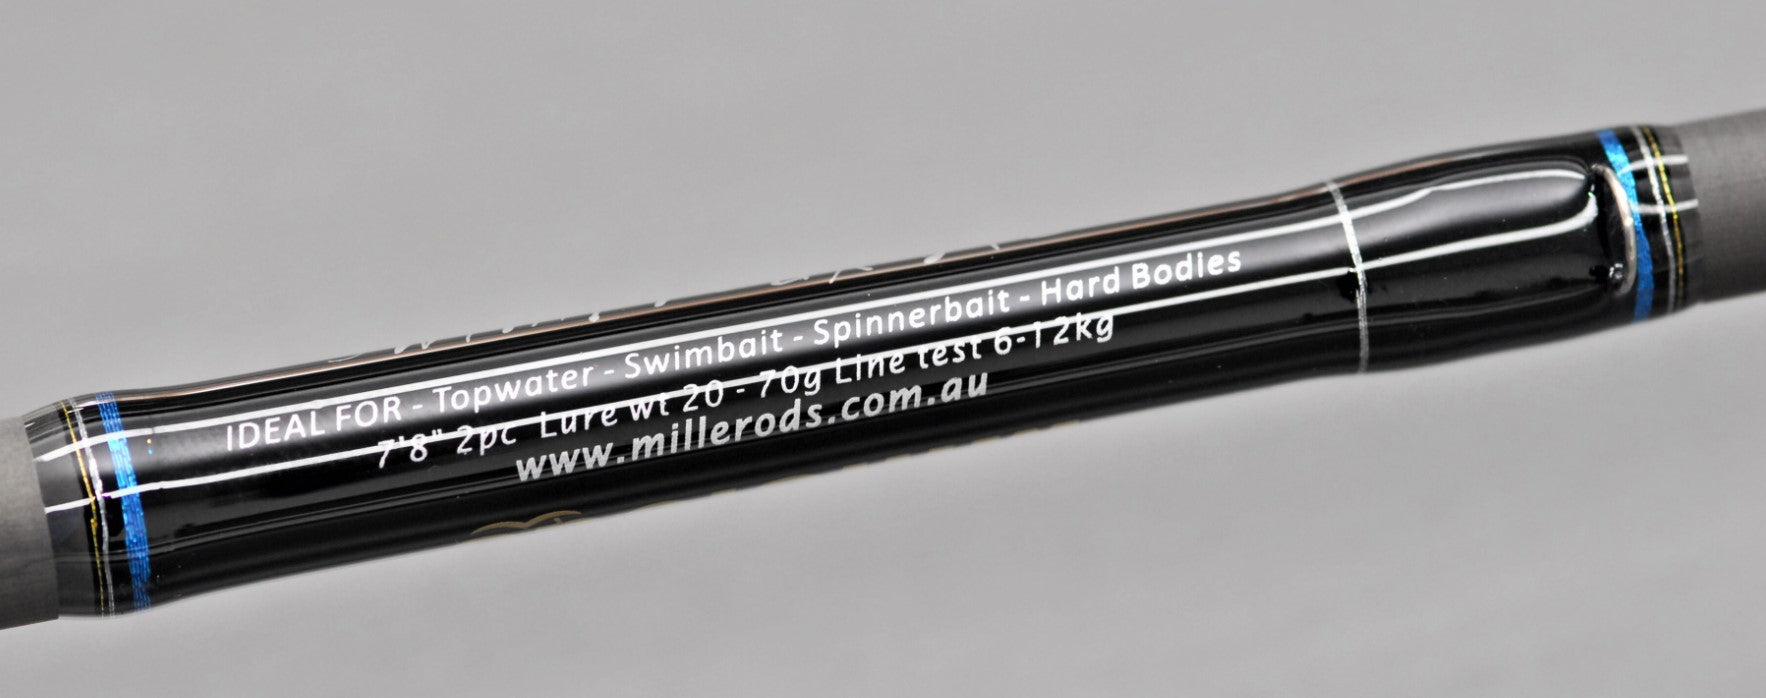 Miller Rods SwimFreak AU -  - Mansfield Hunting & Fishing - Products to prepare for Corona Virus